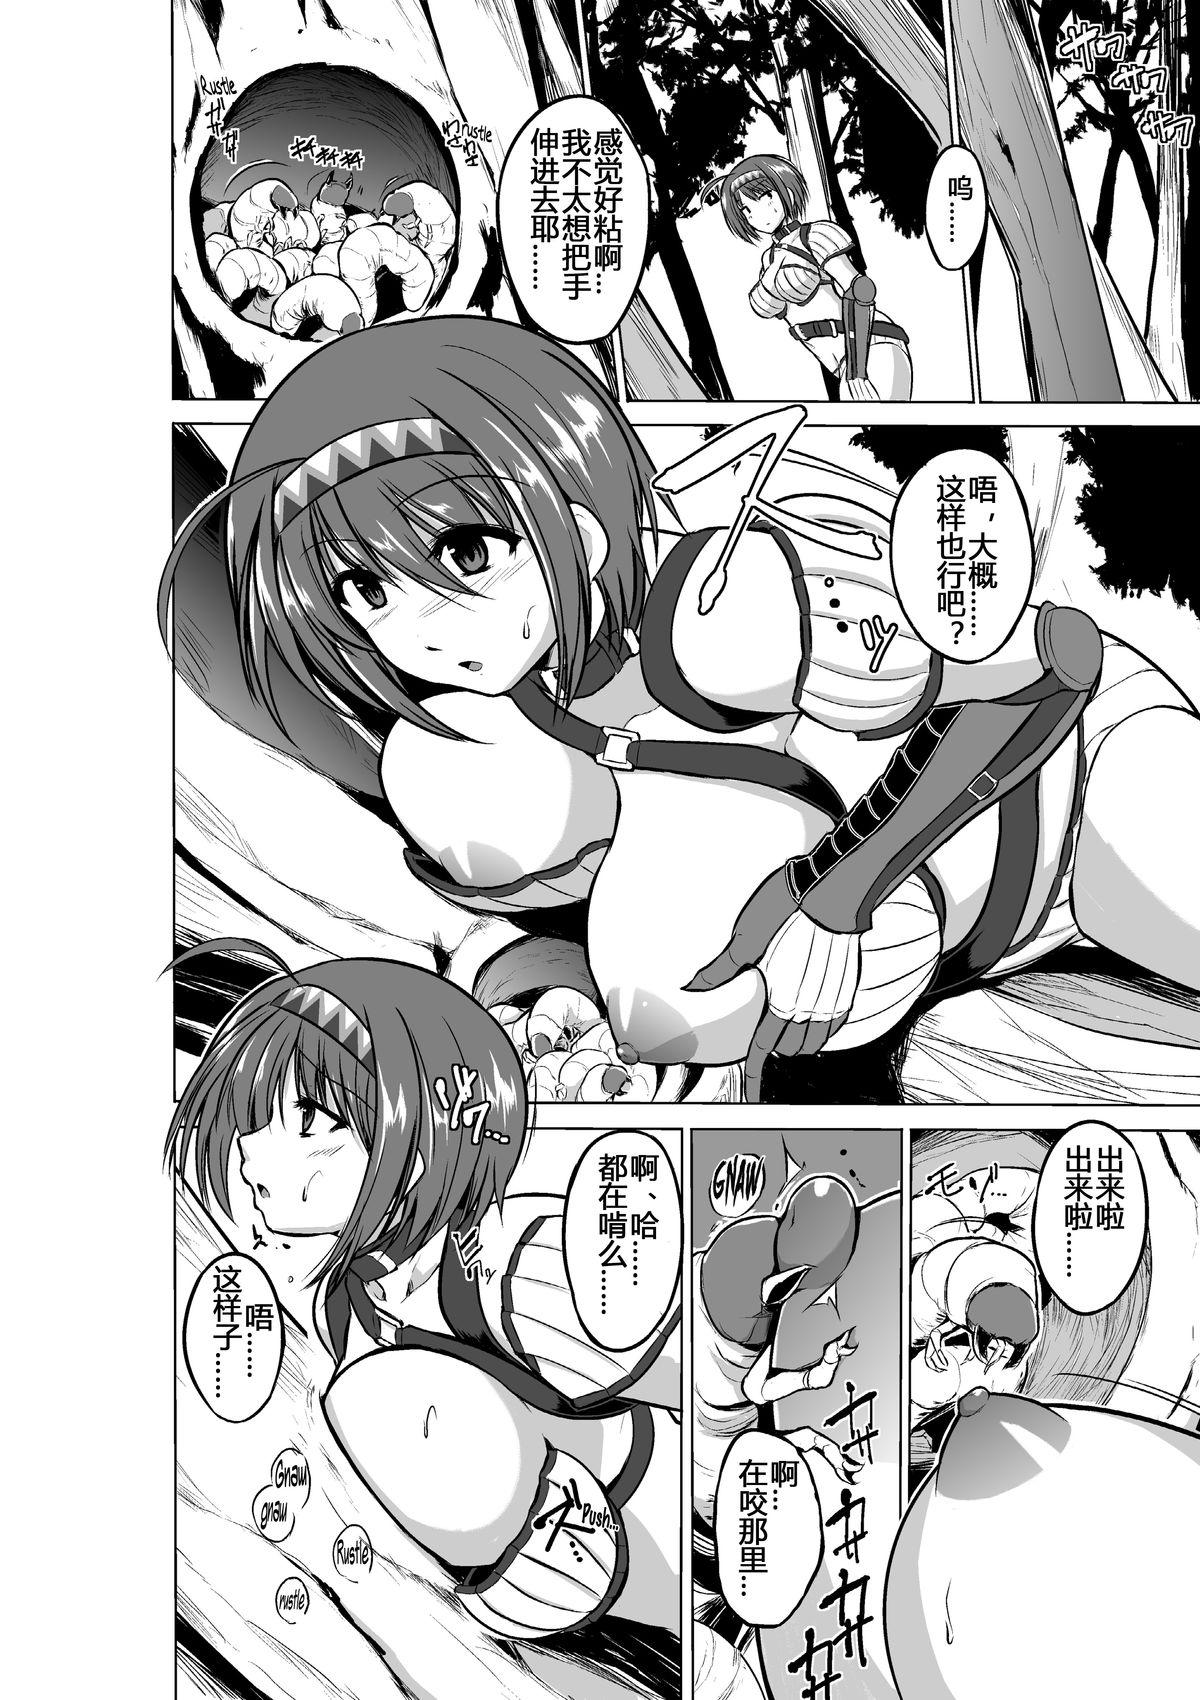 Gay Baitbus Dungeon Travelers - Chie no Himegoto - Toheart2 Step - Page 6